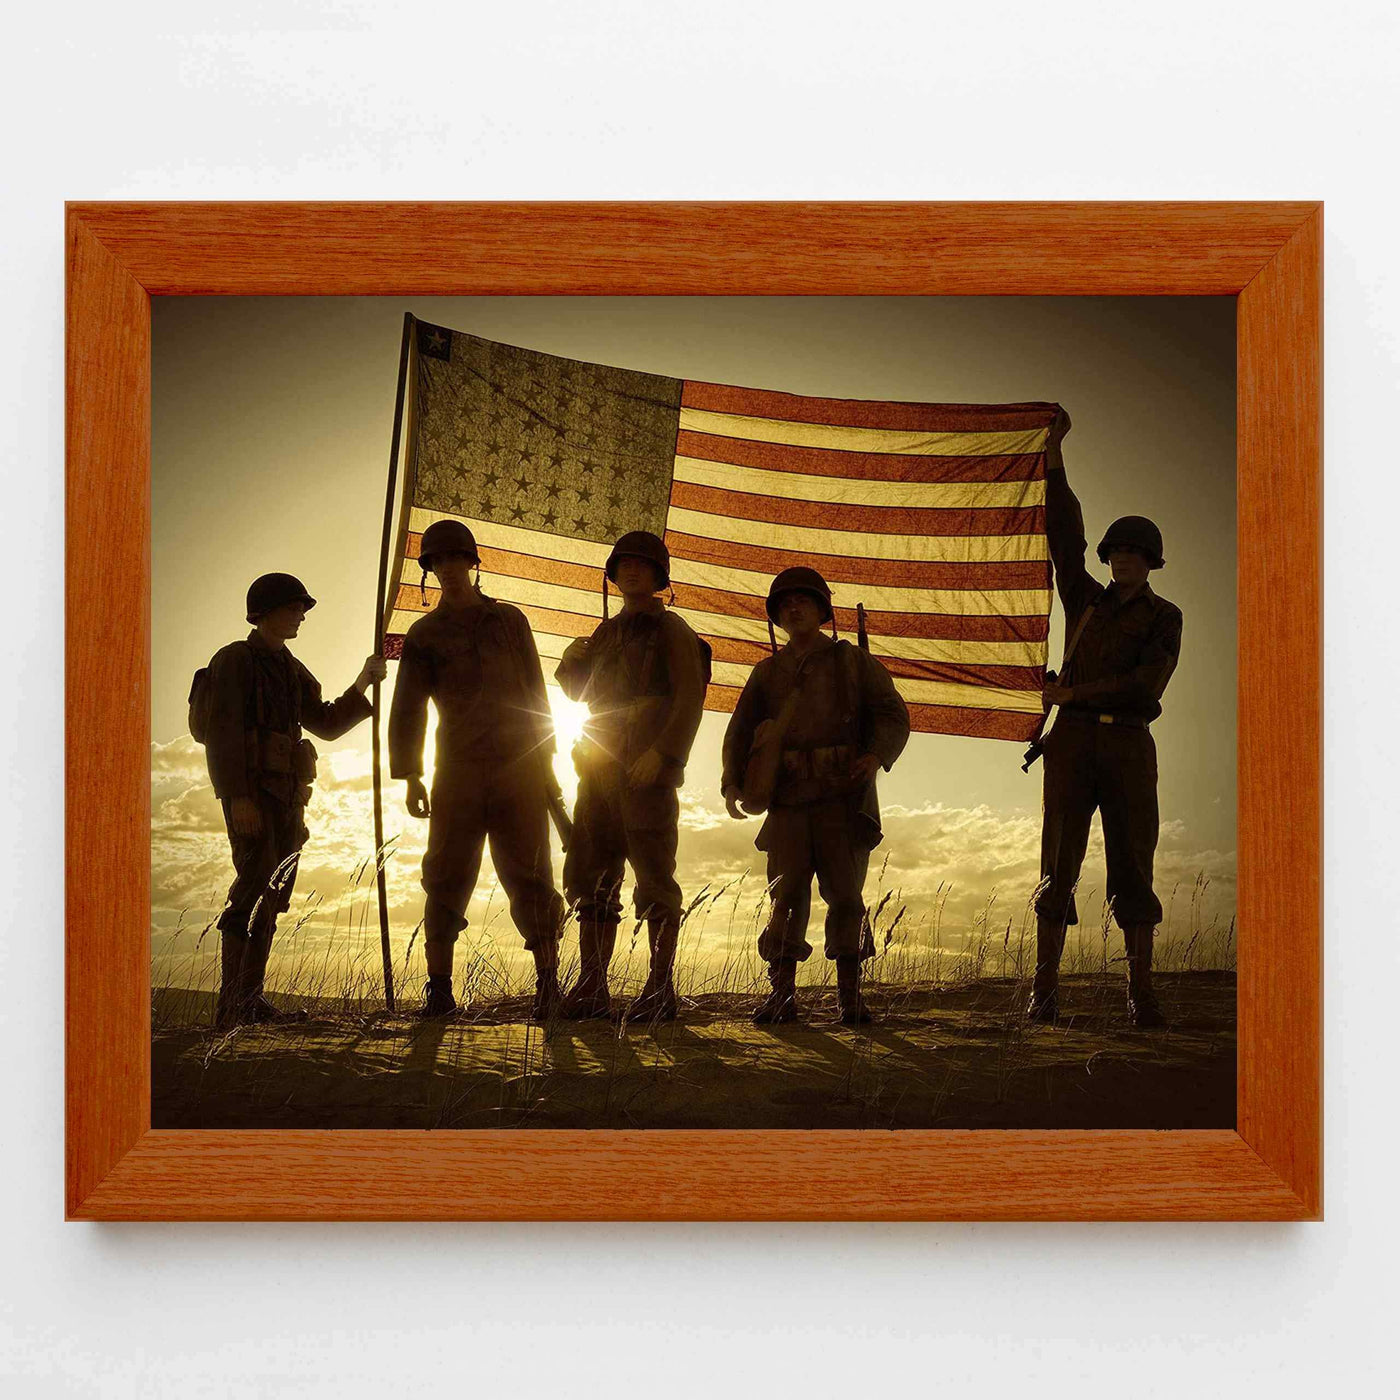 Soldiers Holding Up American Flag Patriotic Wall Art Sign -10 x 8" US Military Poster Print-Ready to Frame. Perfect Home-Office-Man Cave-Shop-Garage Decor. Great Gift for All Soldiers-Veterans!